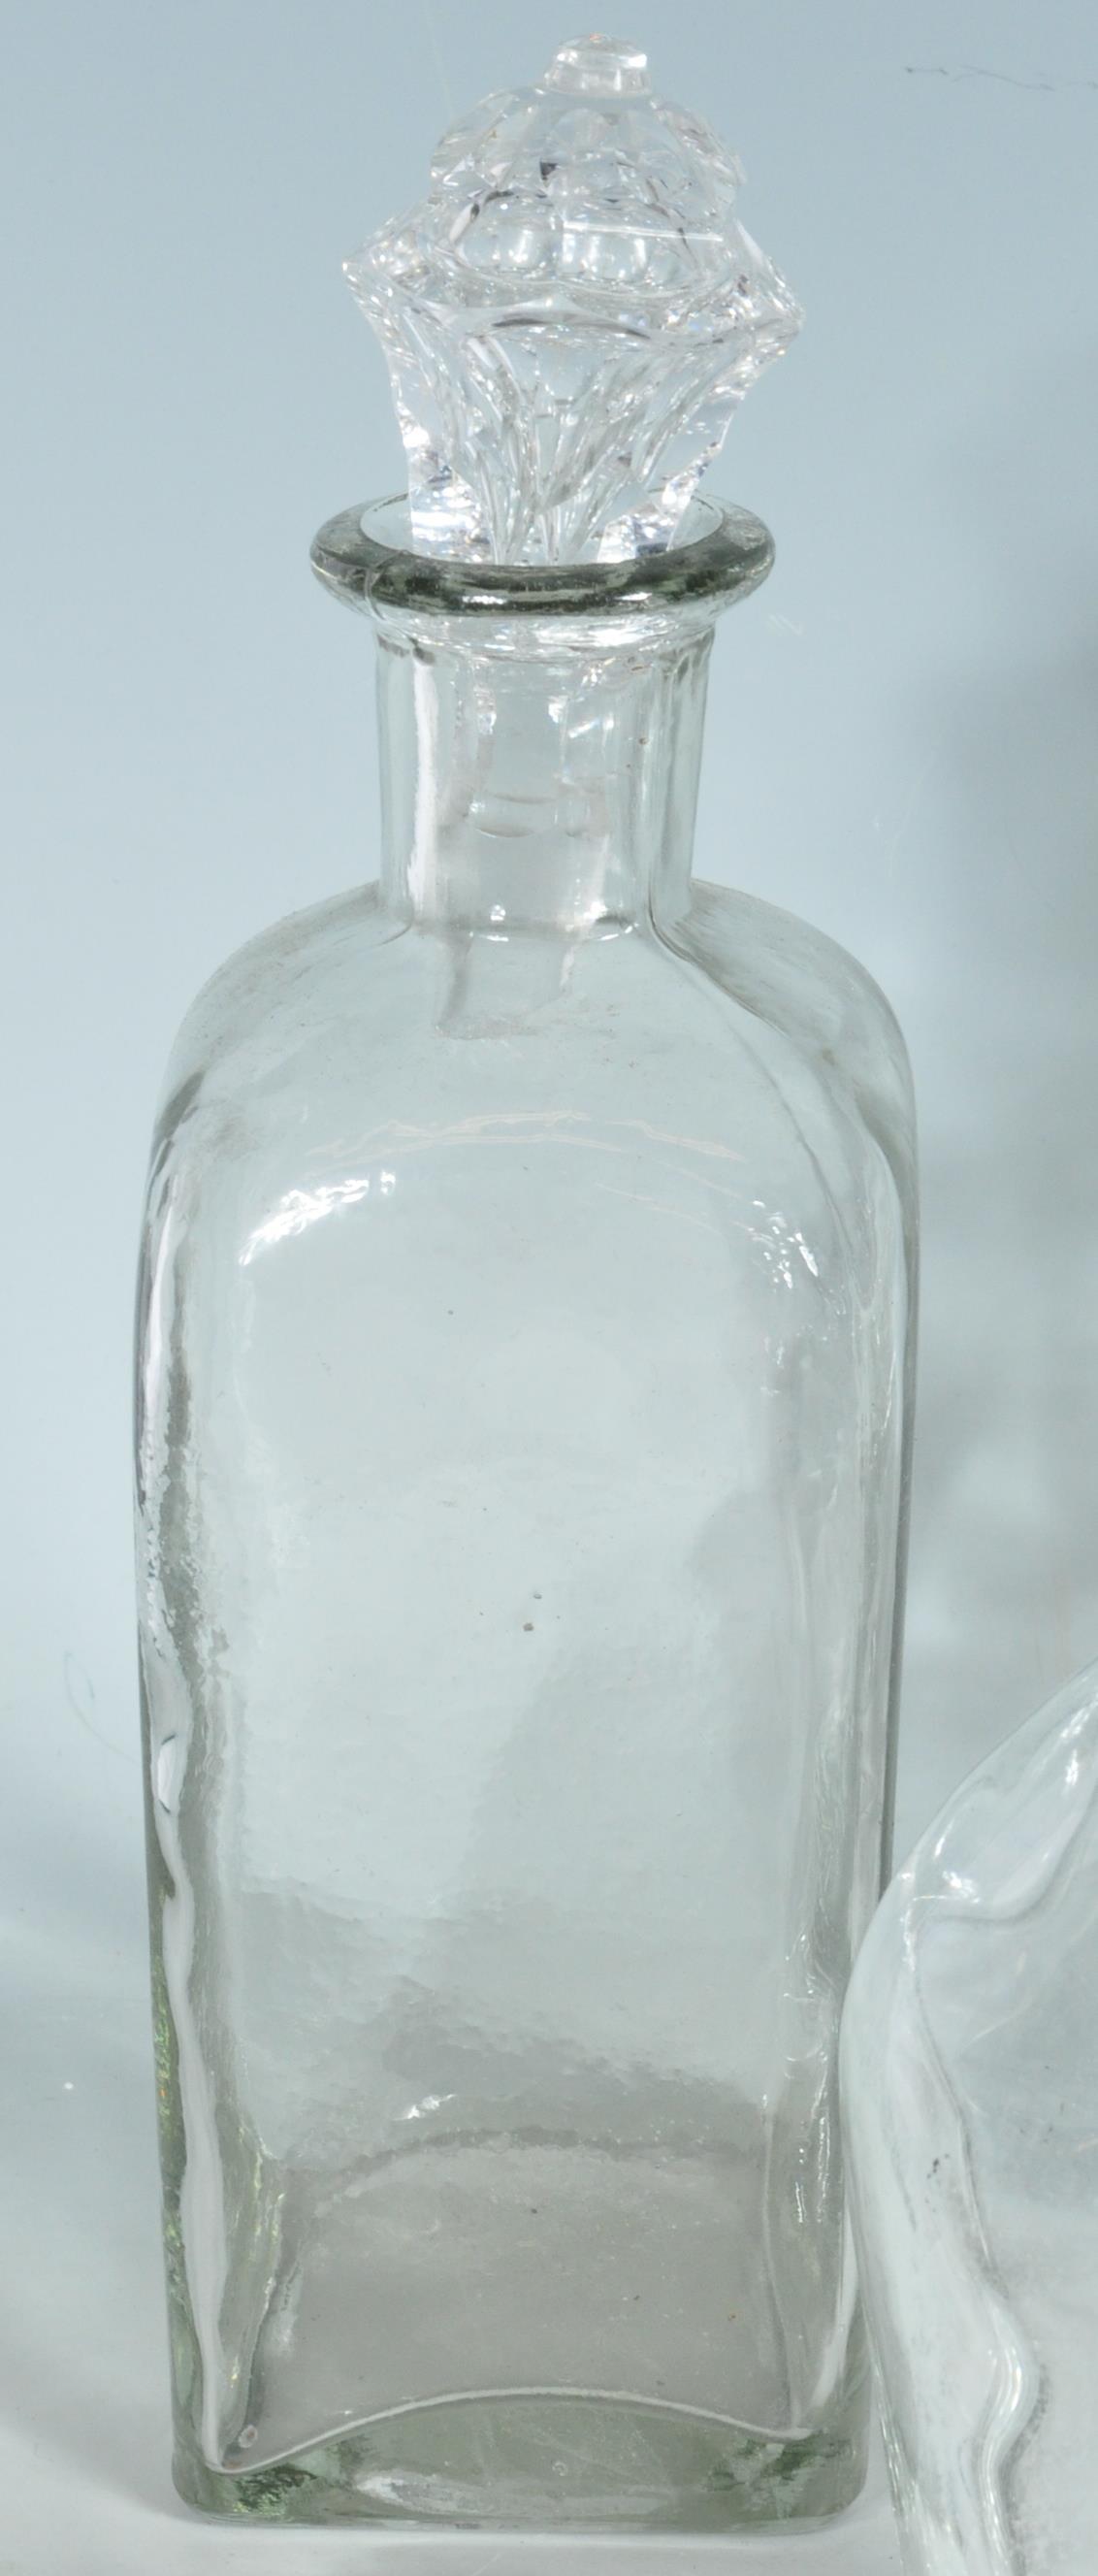 FIVE 18TH AND 19TH CENTURY GEORGIAN DECANTERS - Image 2 of 6